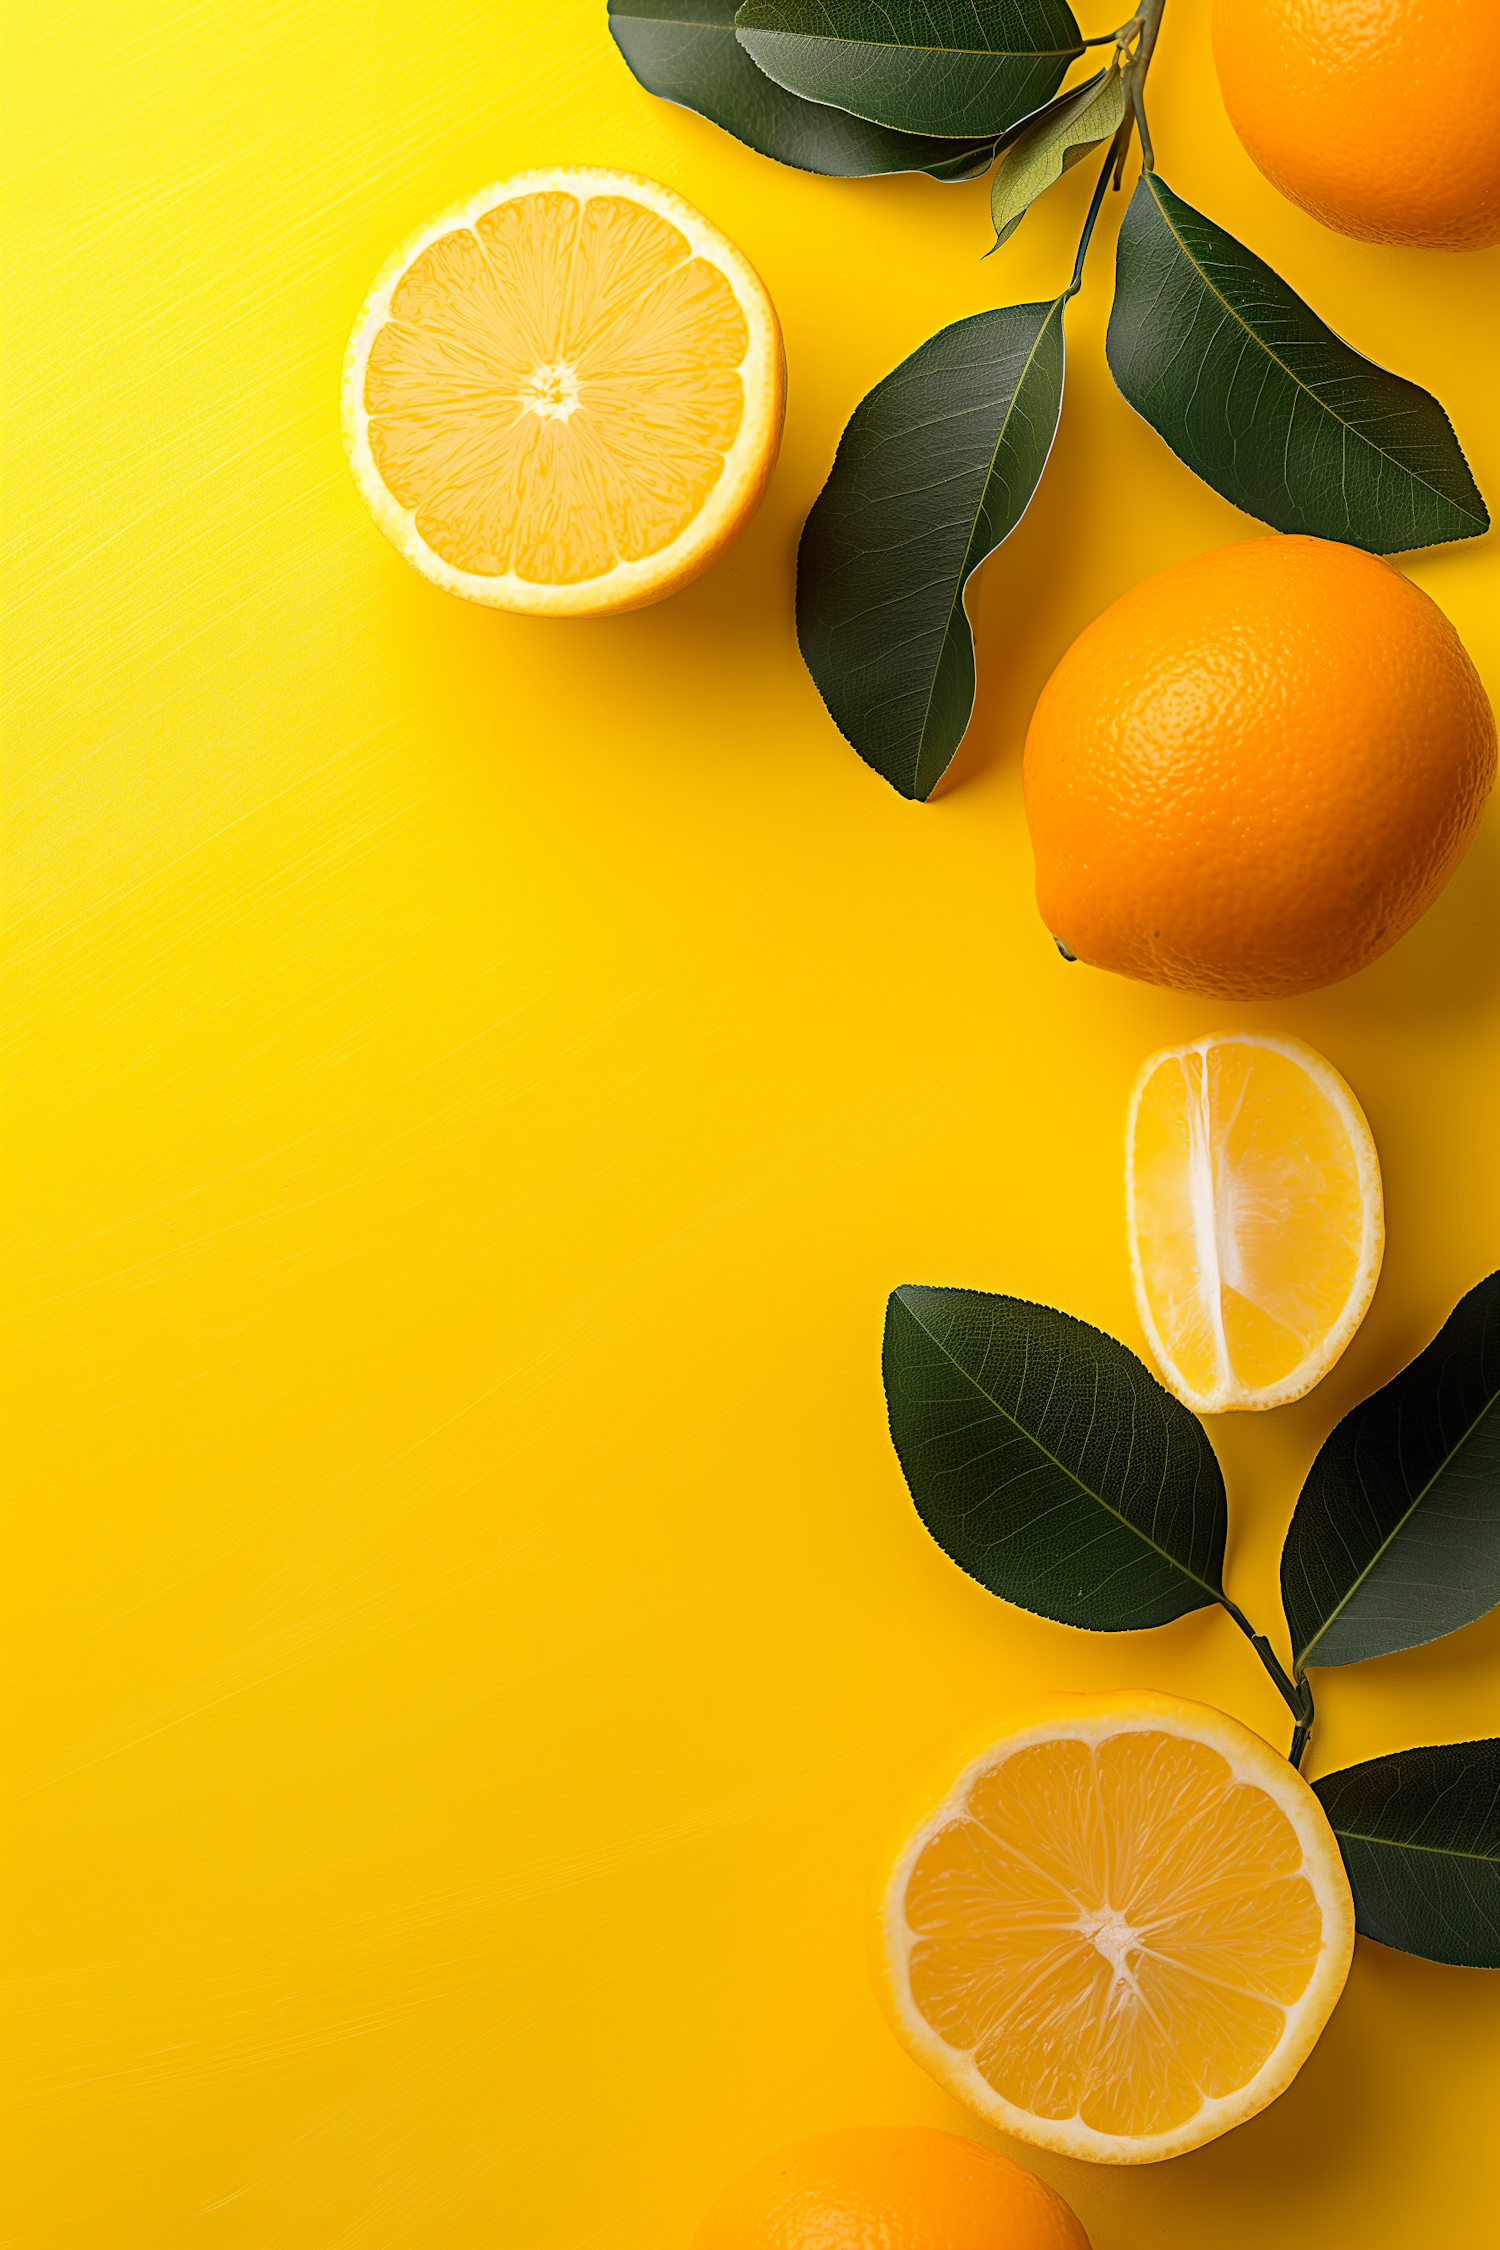 Vibrant Oranges and Slices on Yellow Background